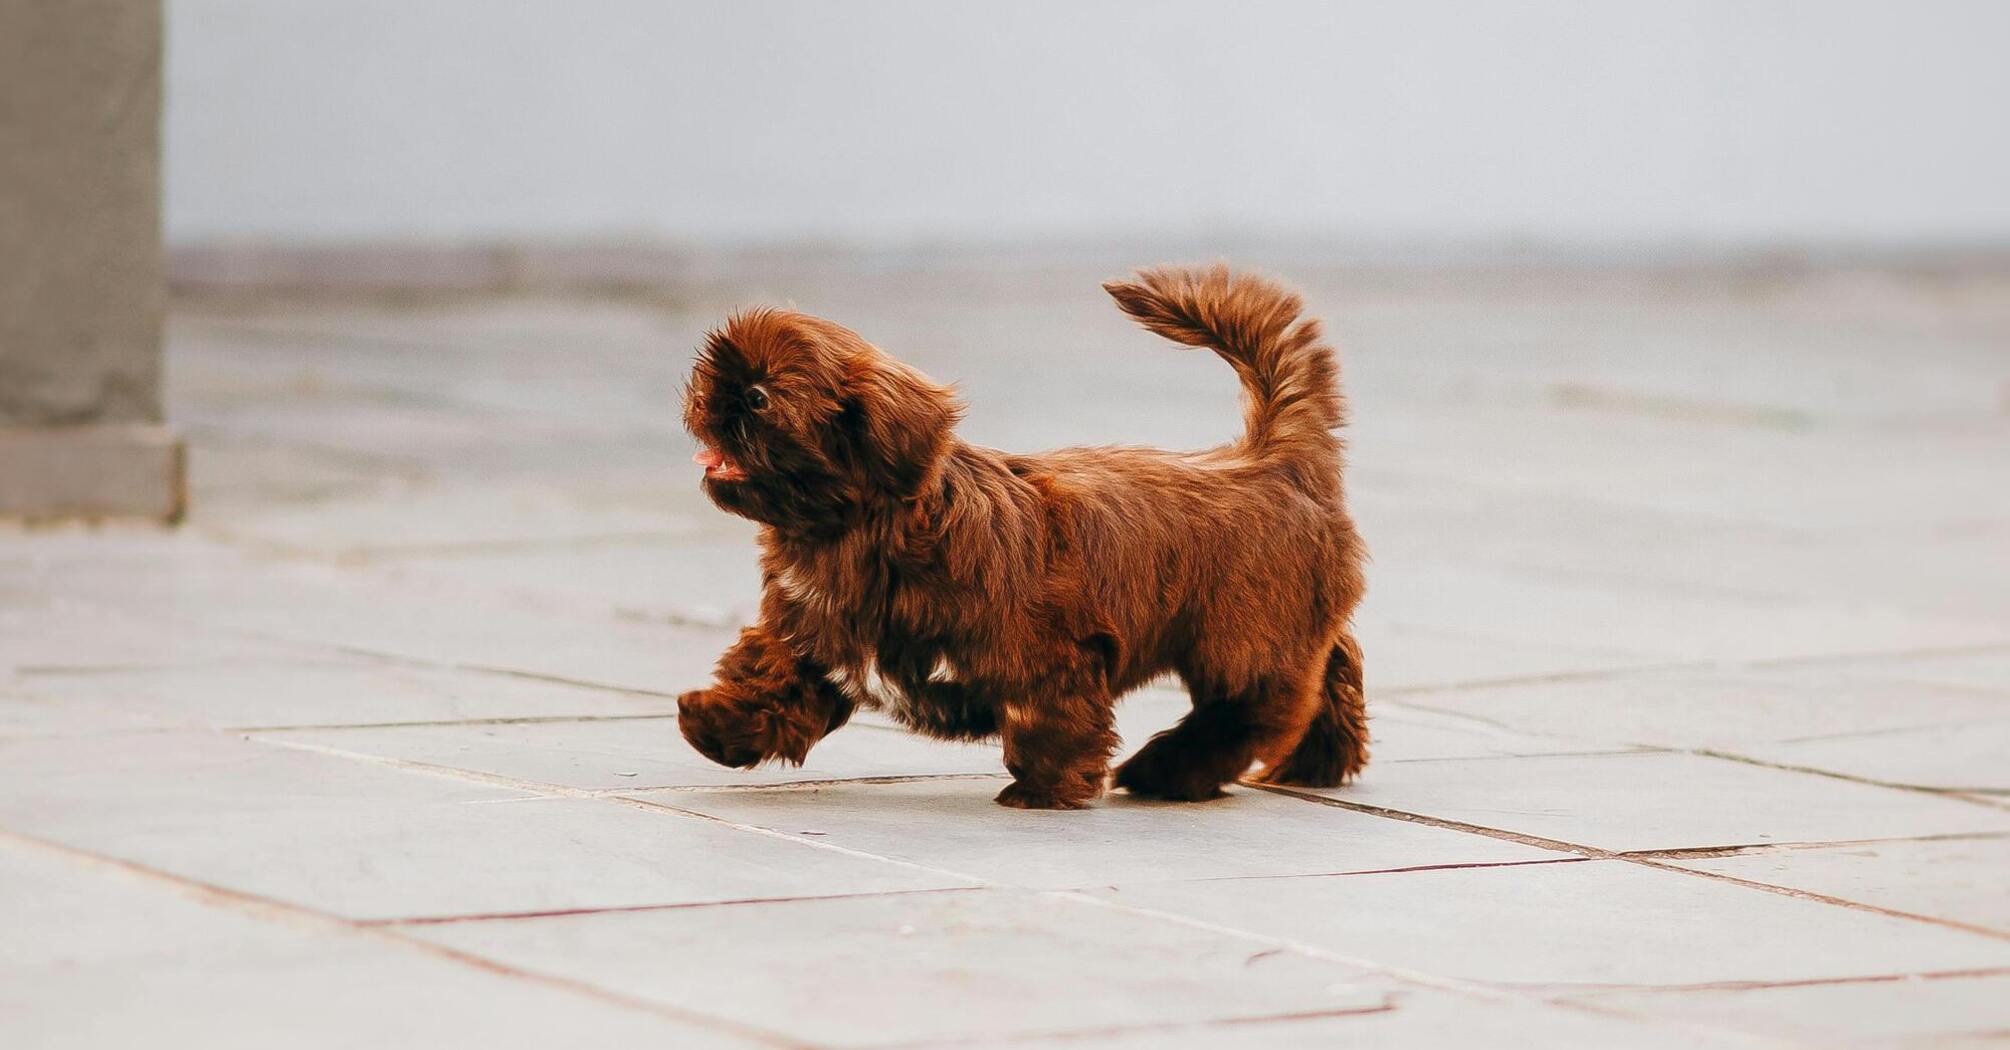 Why a dog chases its tail: this behavior can be associated with health problems